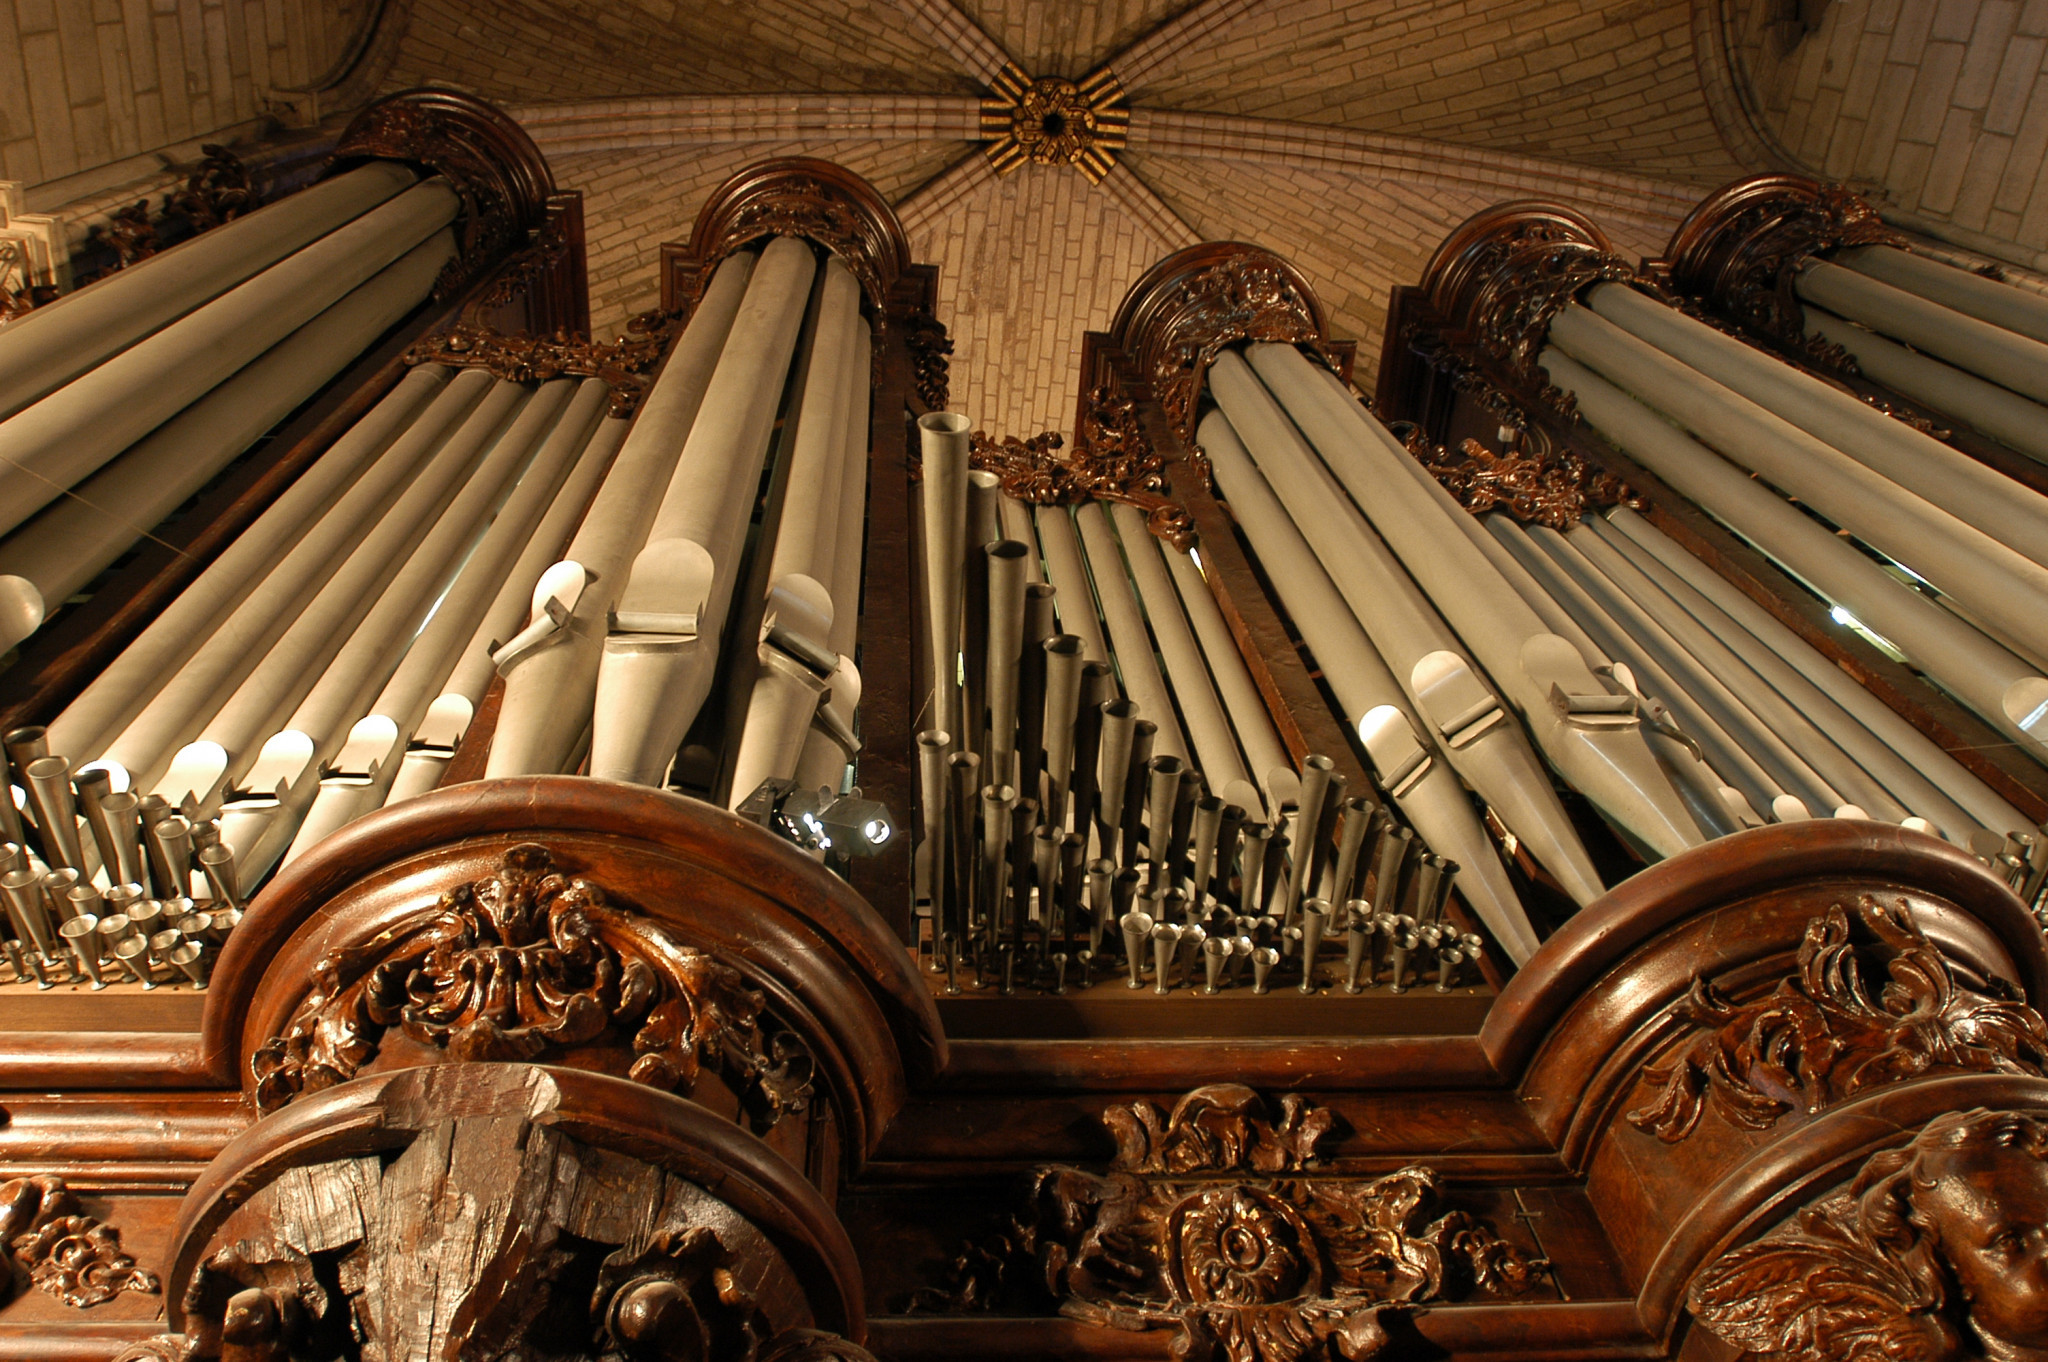 It will take several years for workers to dismantle the 8,000 pipes, 109 stop knobs and five keyboards so they can repair France's largest musical instrument in time for the 2024 Olympic Games ©Getty Images